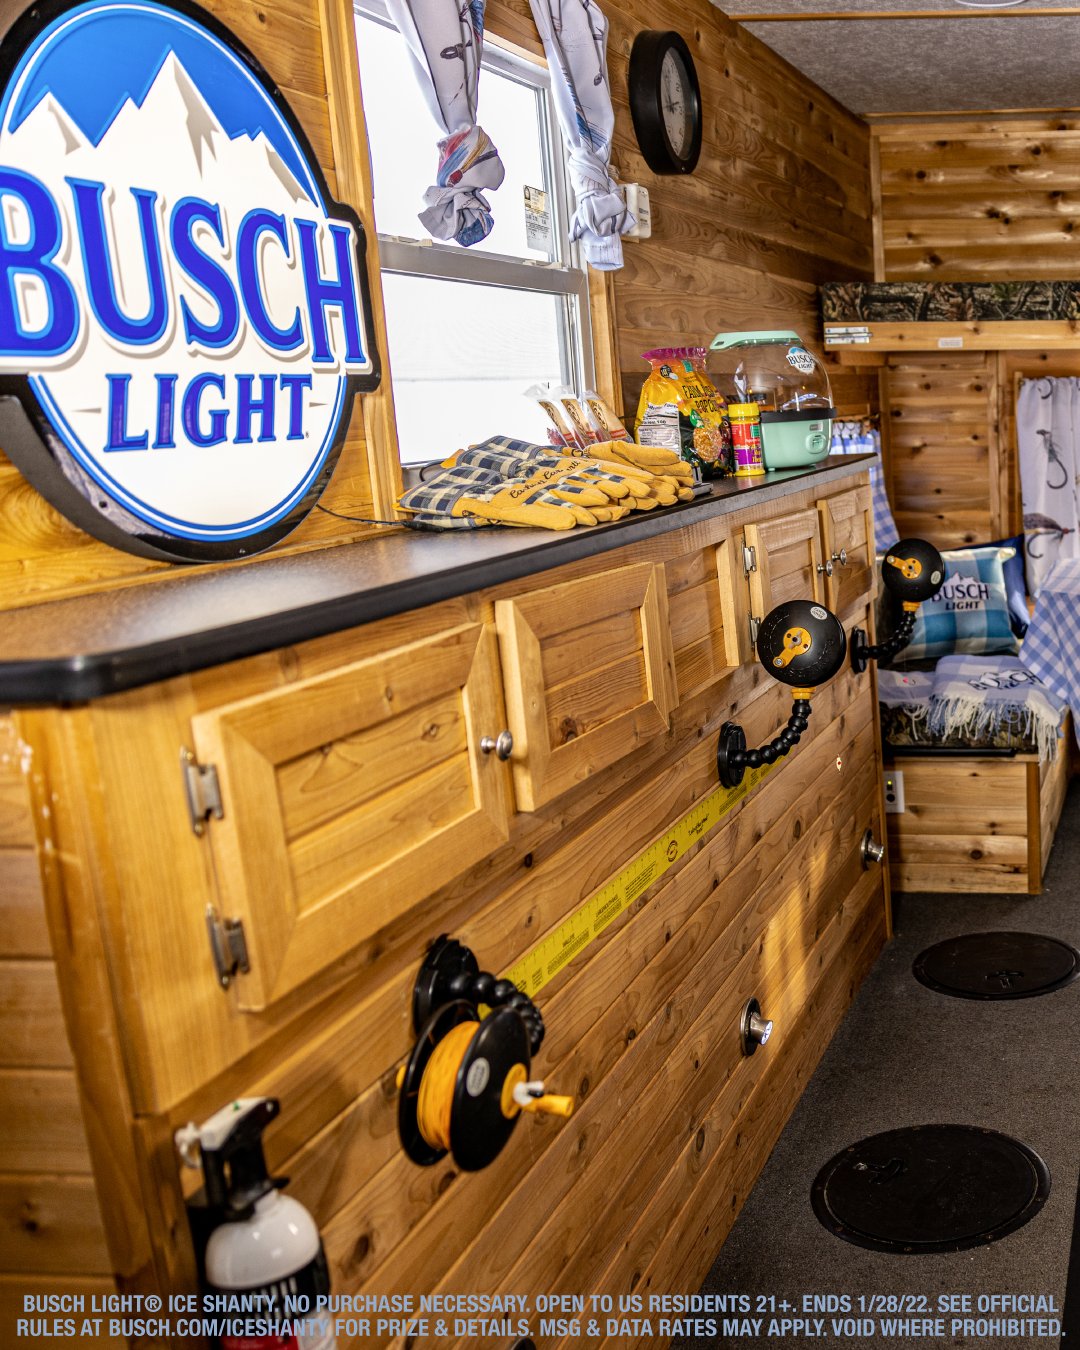 Busch Beer on X: ❄️ WIN A STAY IN THE BUSCH LIGHT ICE SHANTY